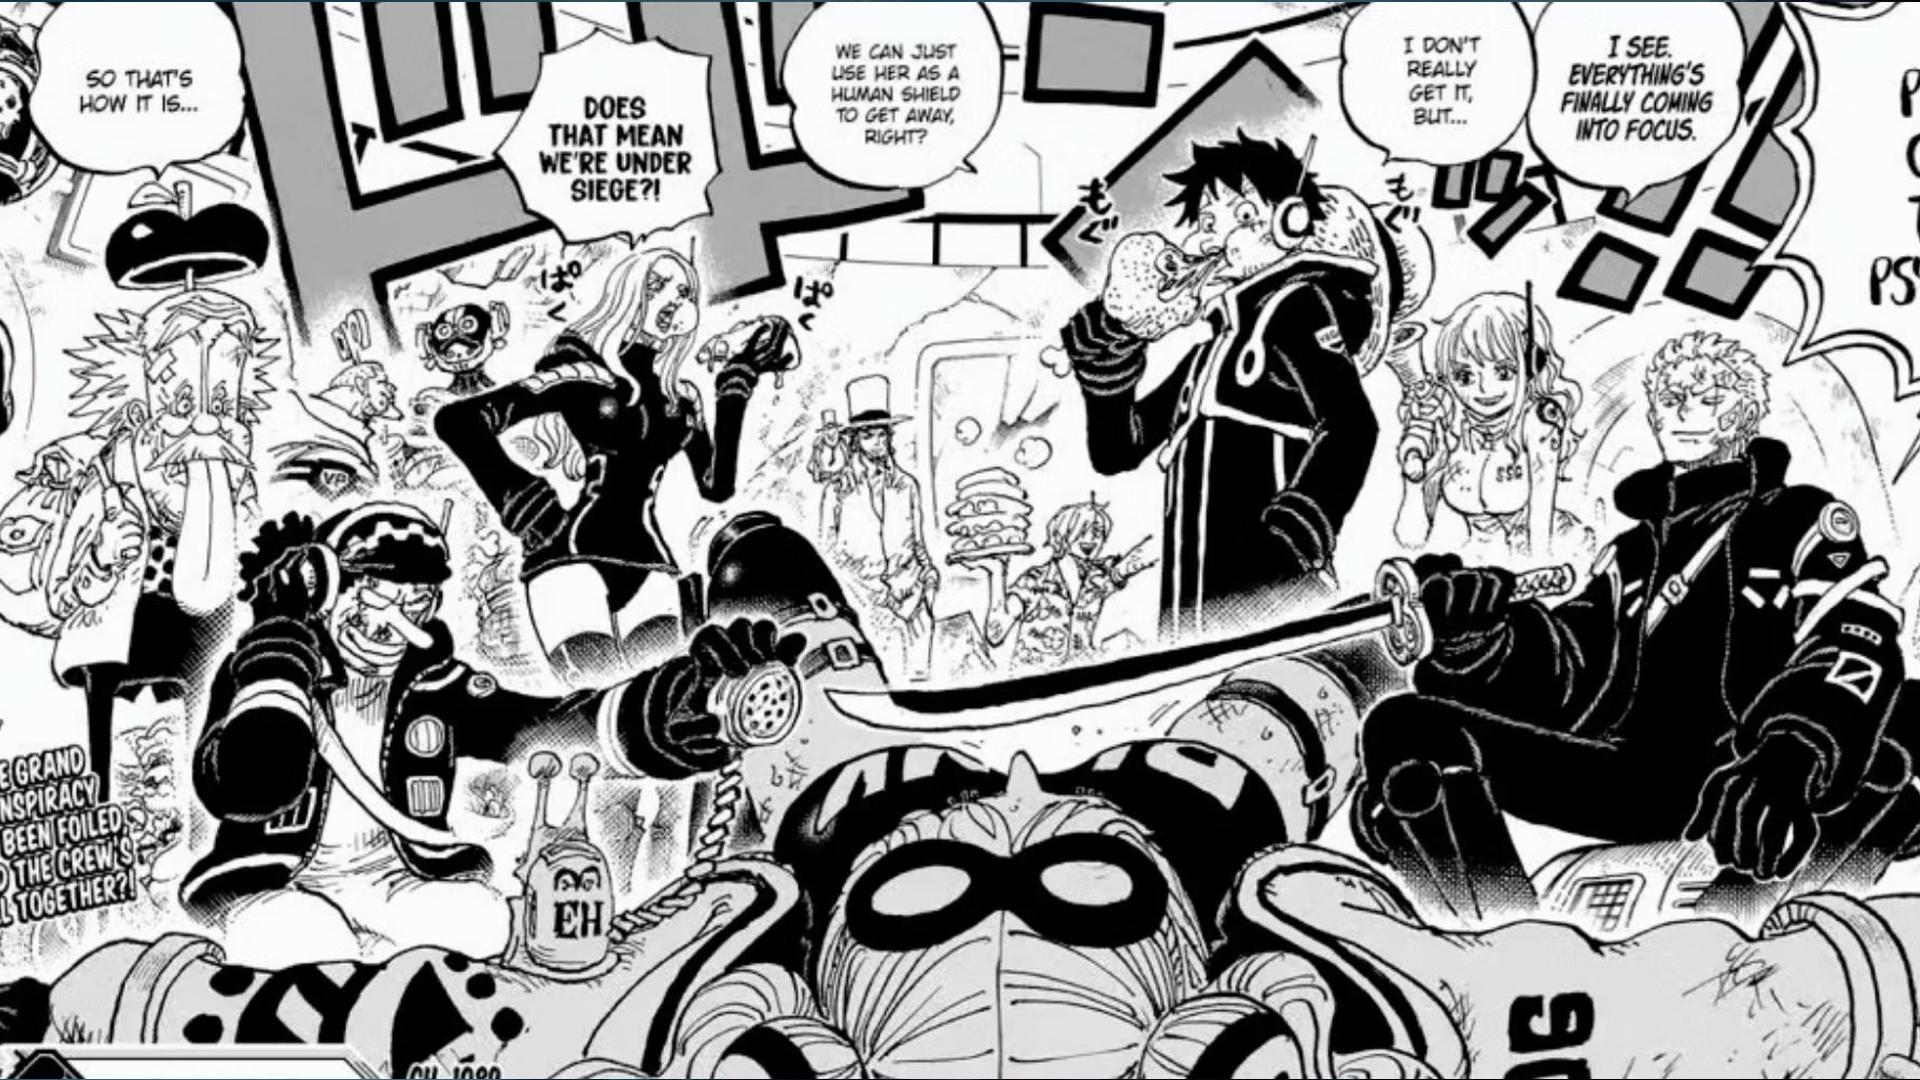 One Piece Chapter 1091